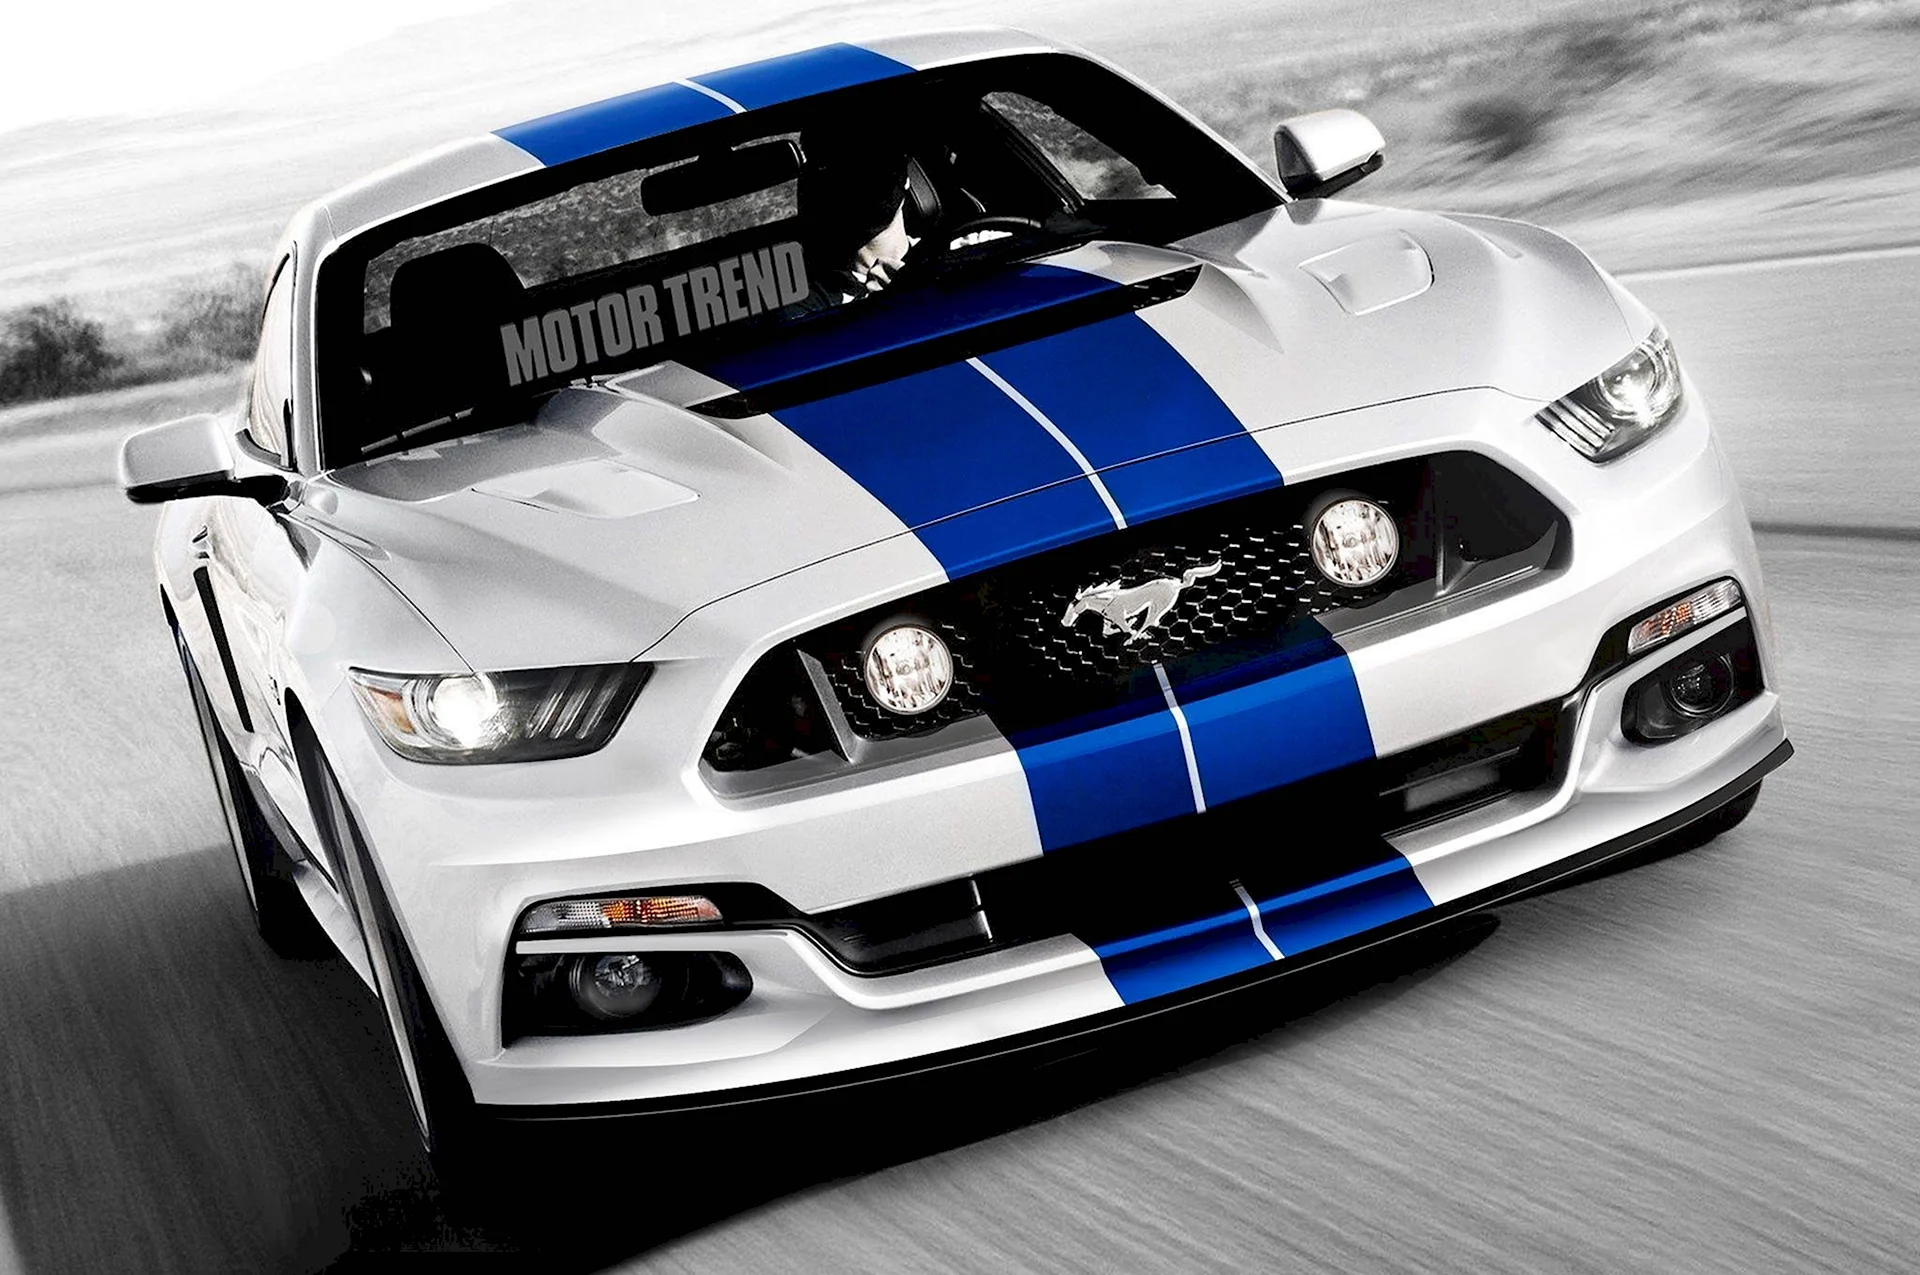 Ford Mustang Shelby gt500 2016